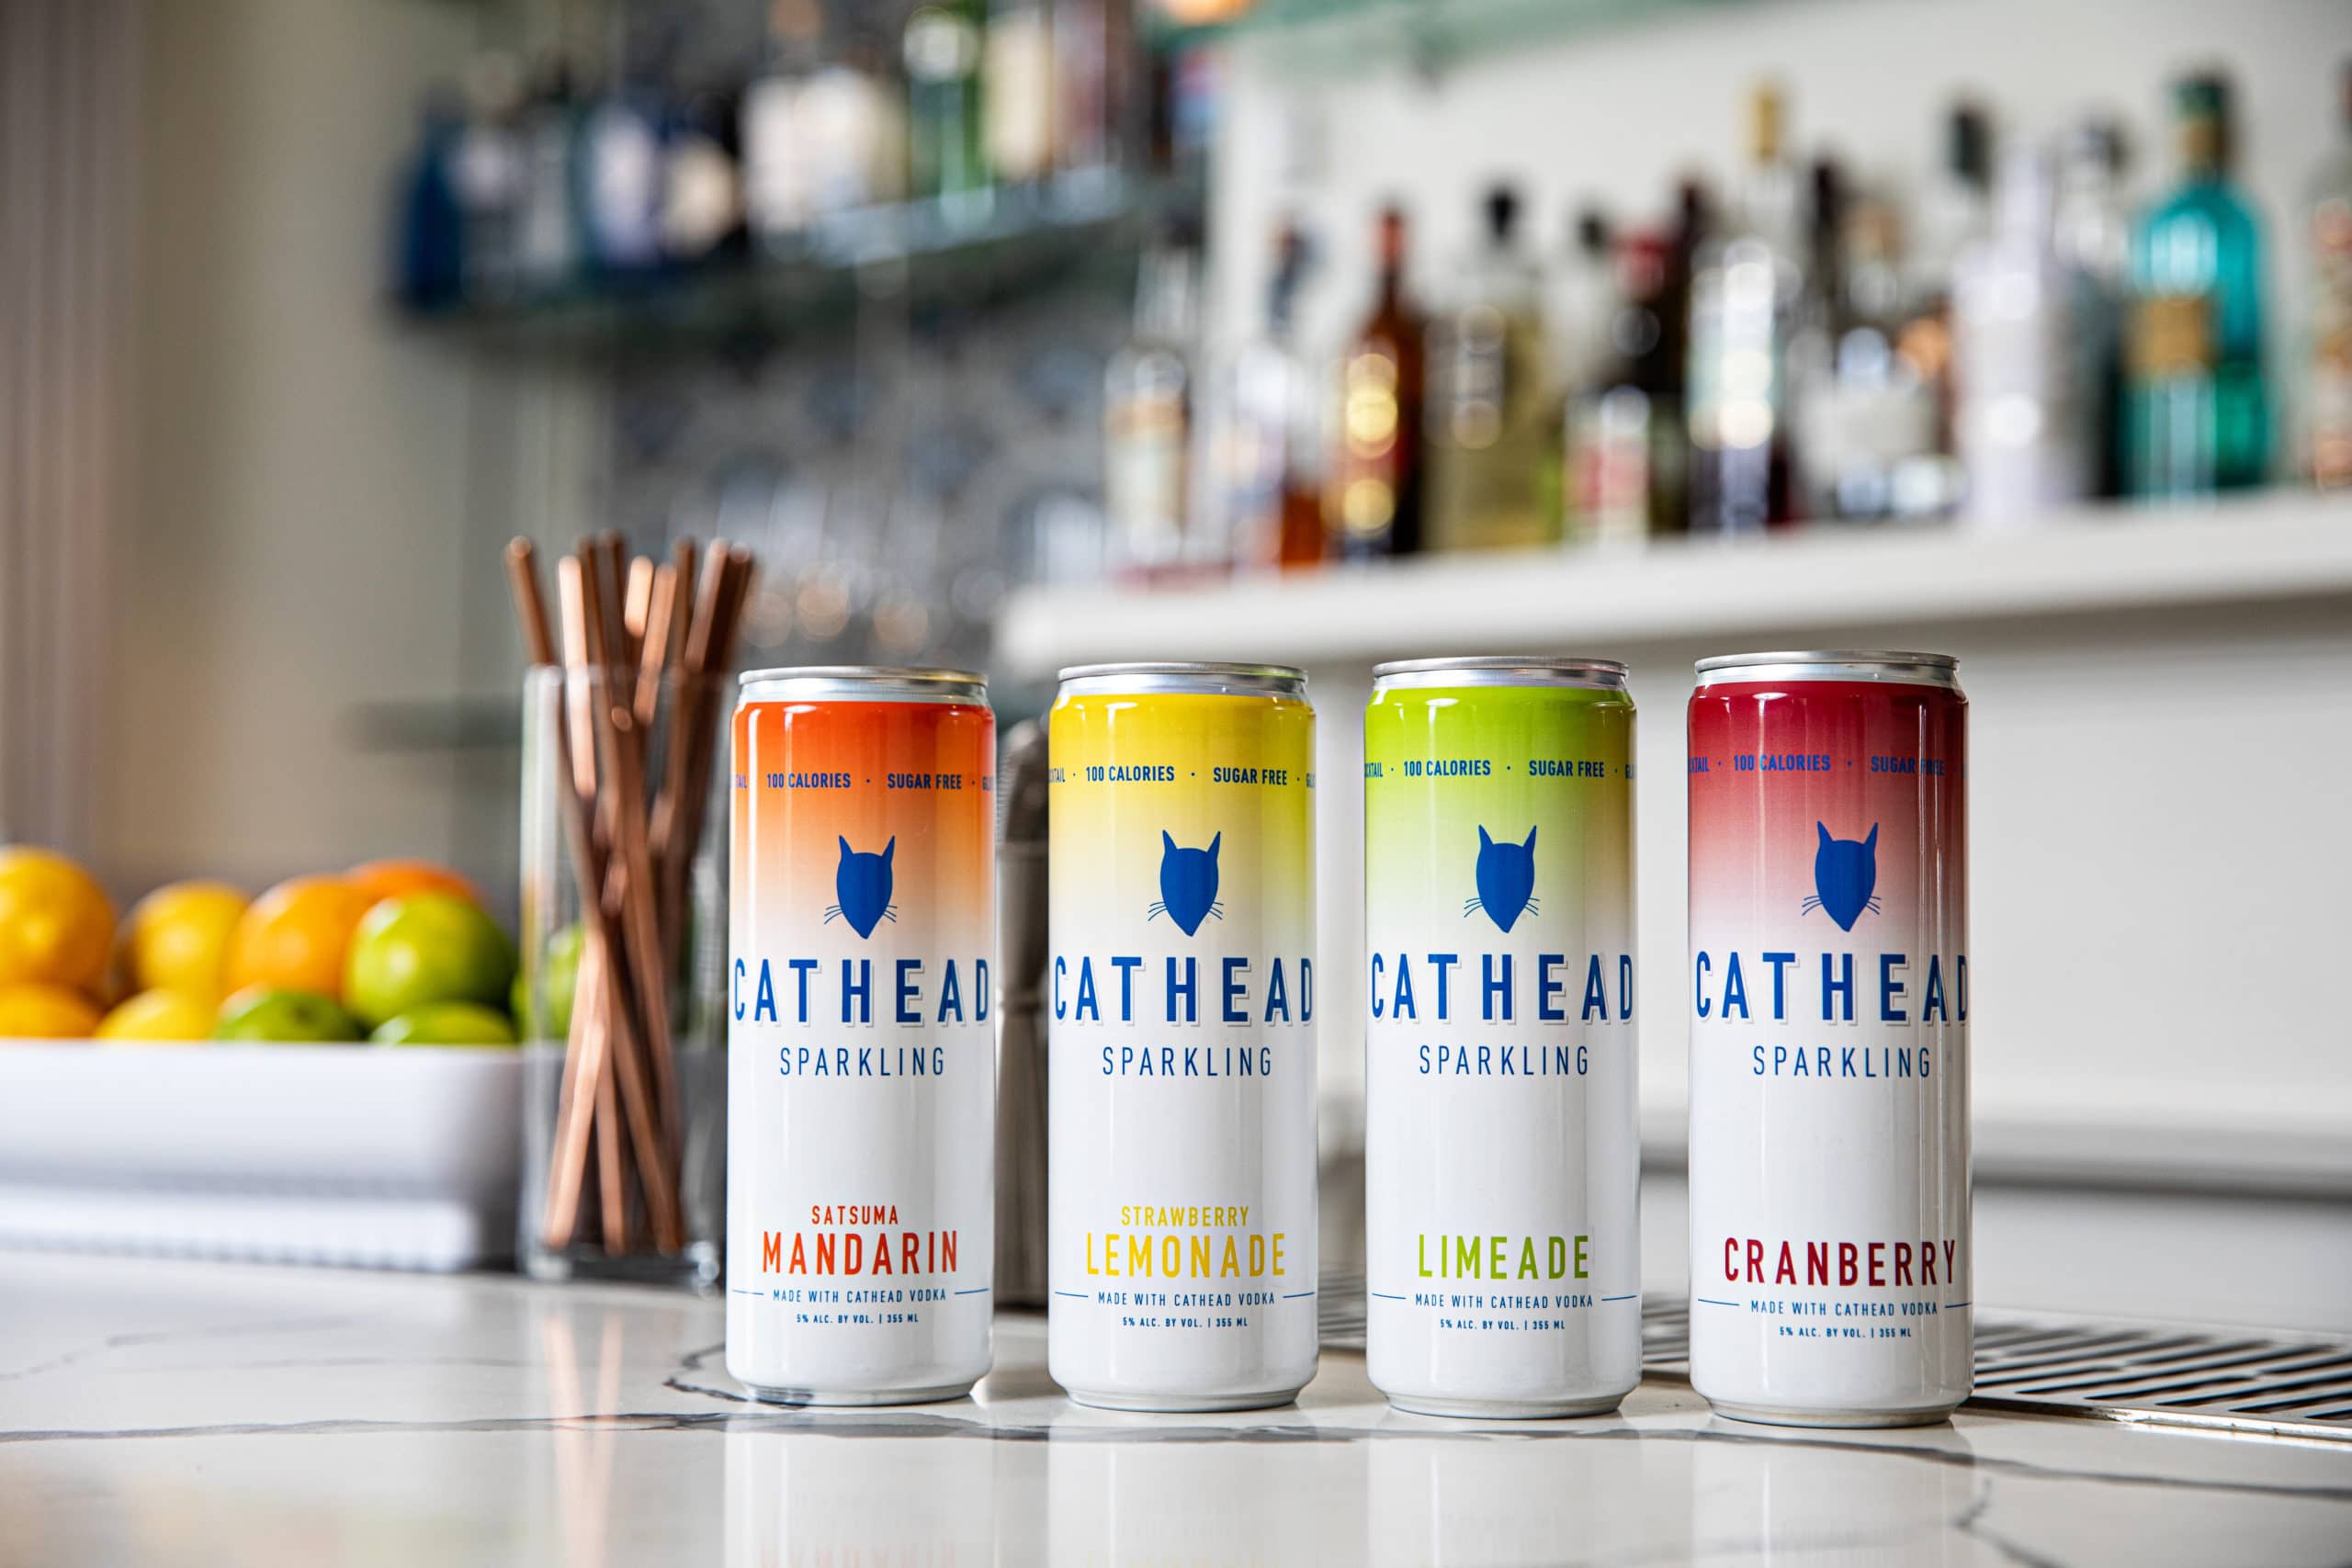 Cathead Sparkling canned cocktails